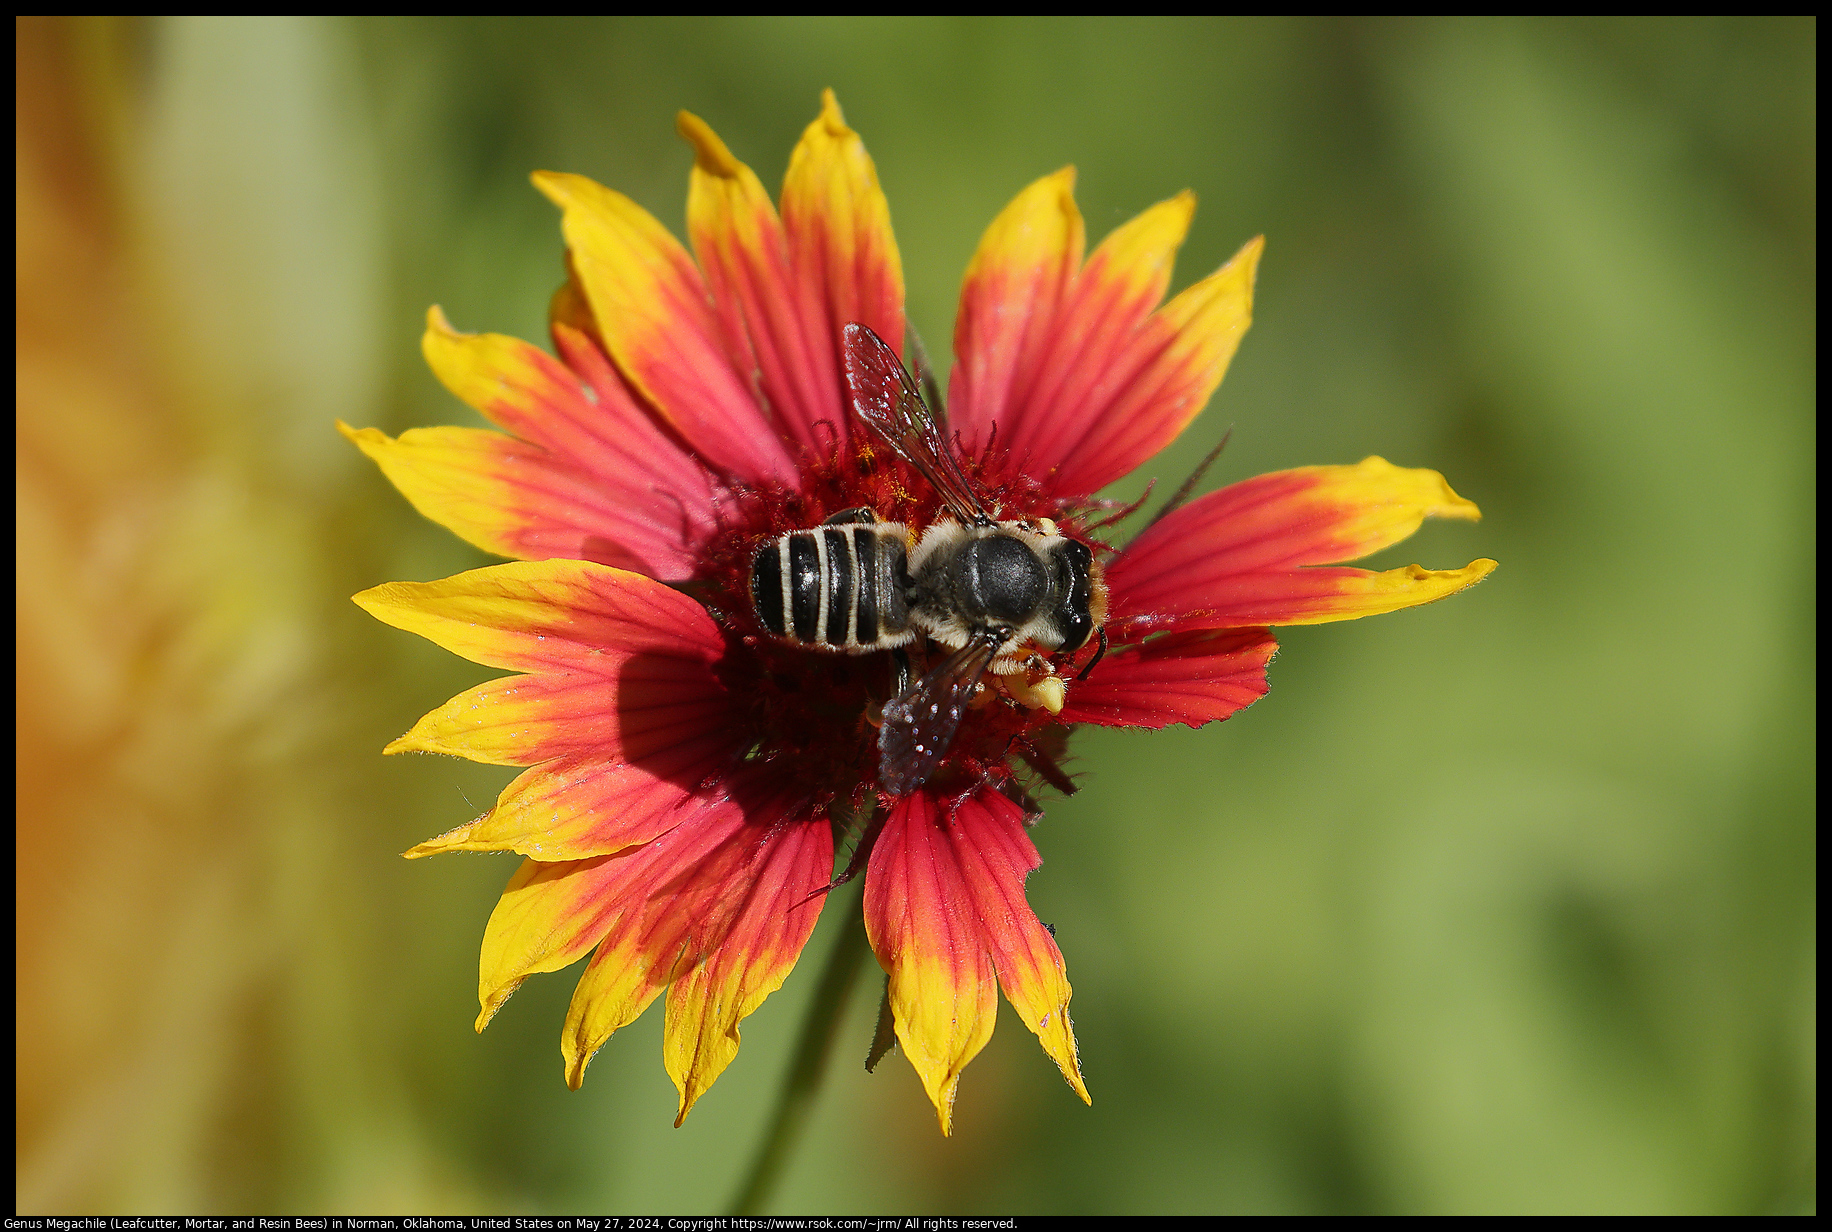 Genus Megachile (Leafcutter, Mortar, and Resin Bees) in Norman, Oklahoma, United States on May 27, 2024